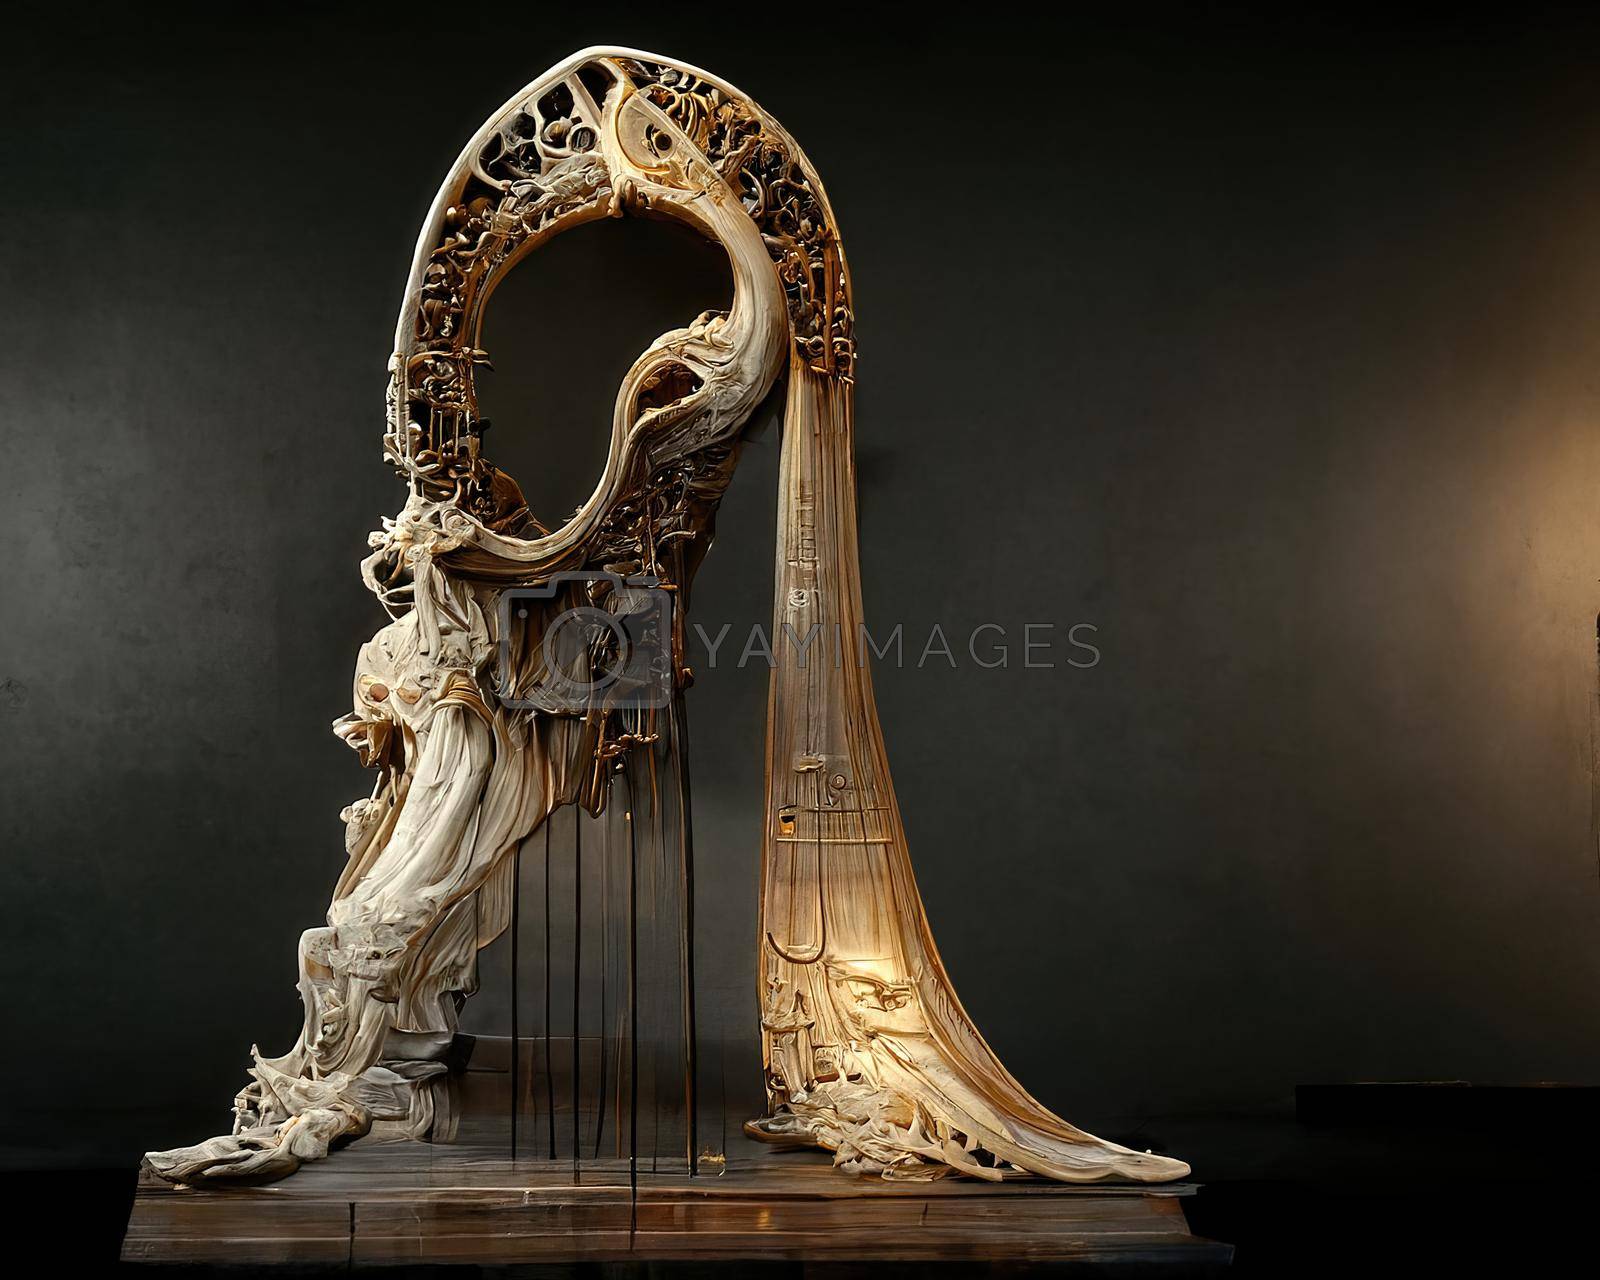 Royalty free image of Picture of baroque harp statue, 3d illustration by Farcas